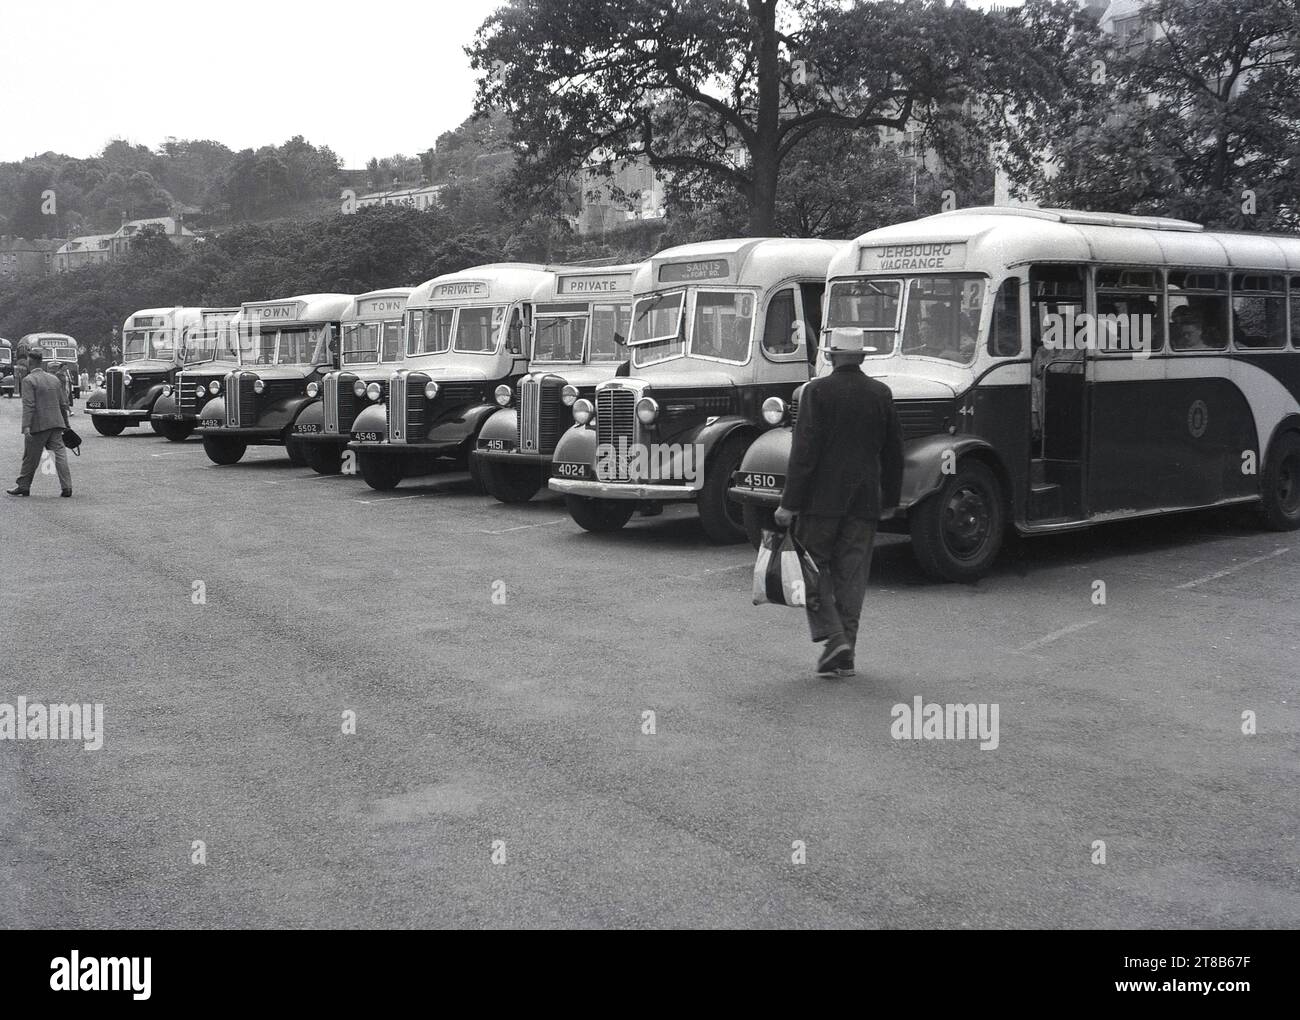 1950s, historical, tourist or excurison Bedford coaches of the era, parked up in a line on Guernsey, Channel Islands. Part of the part of the Guernsey Motor fleet, the destinations includde; Jerbourg via Grange, Saints via Fort Rd and the Town. Stock Photo